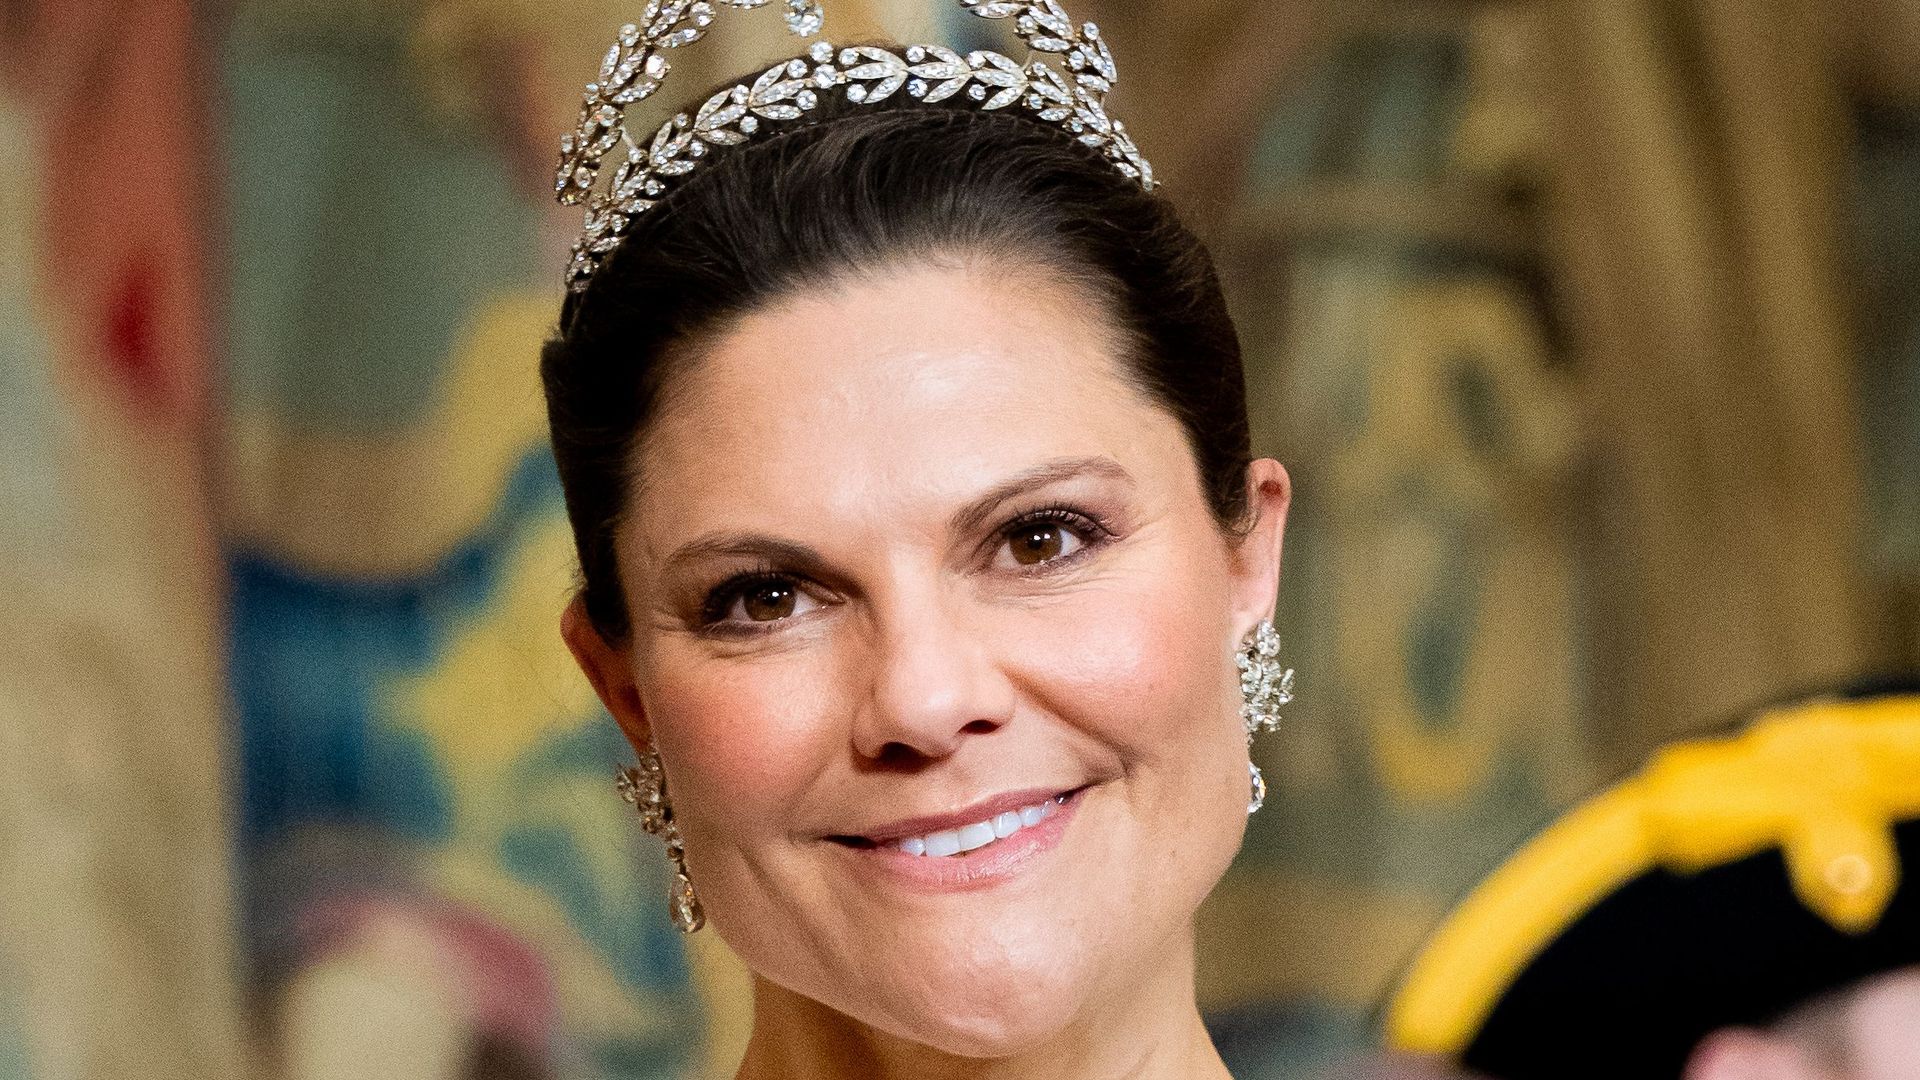 Crown Princess Victoria is picture-perfect in regal feathered look with heirloom tiara